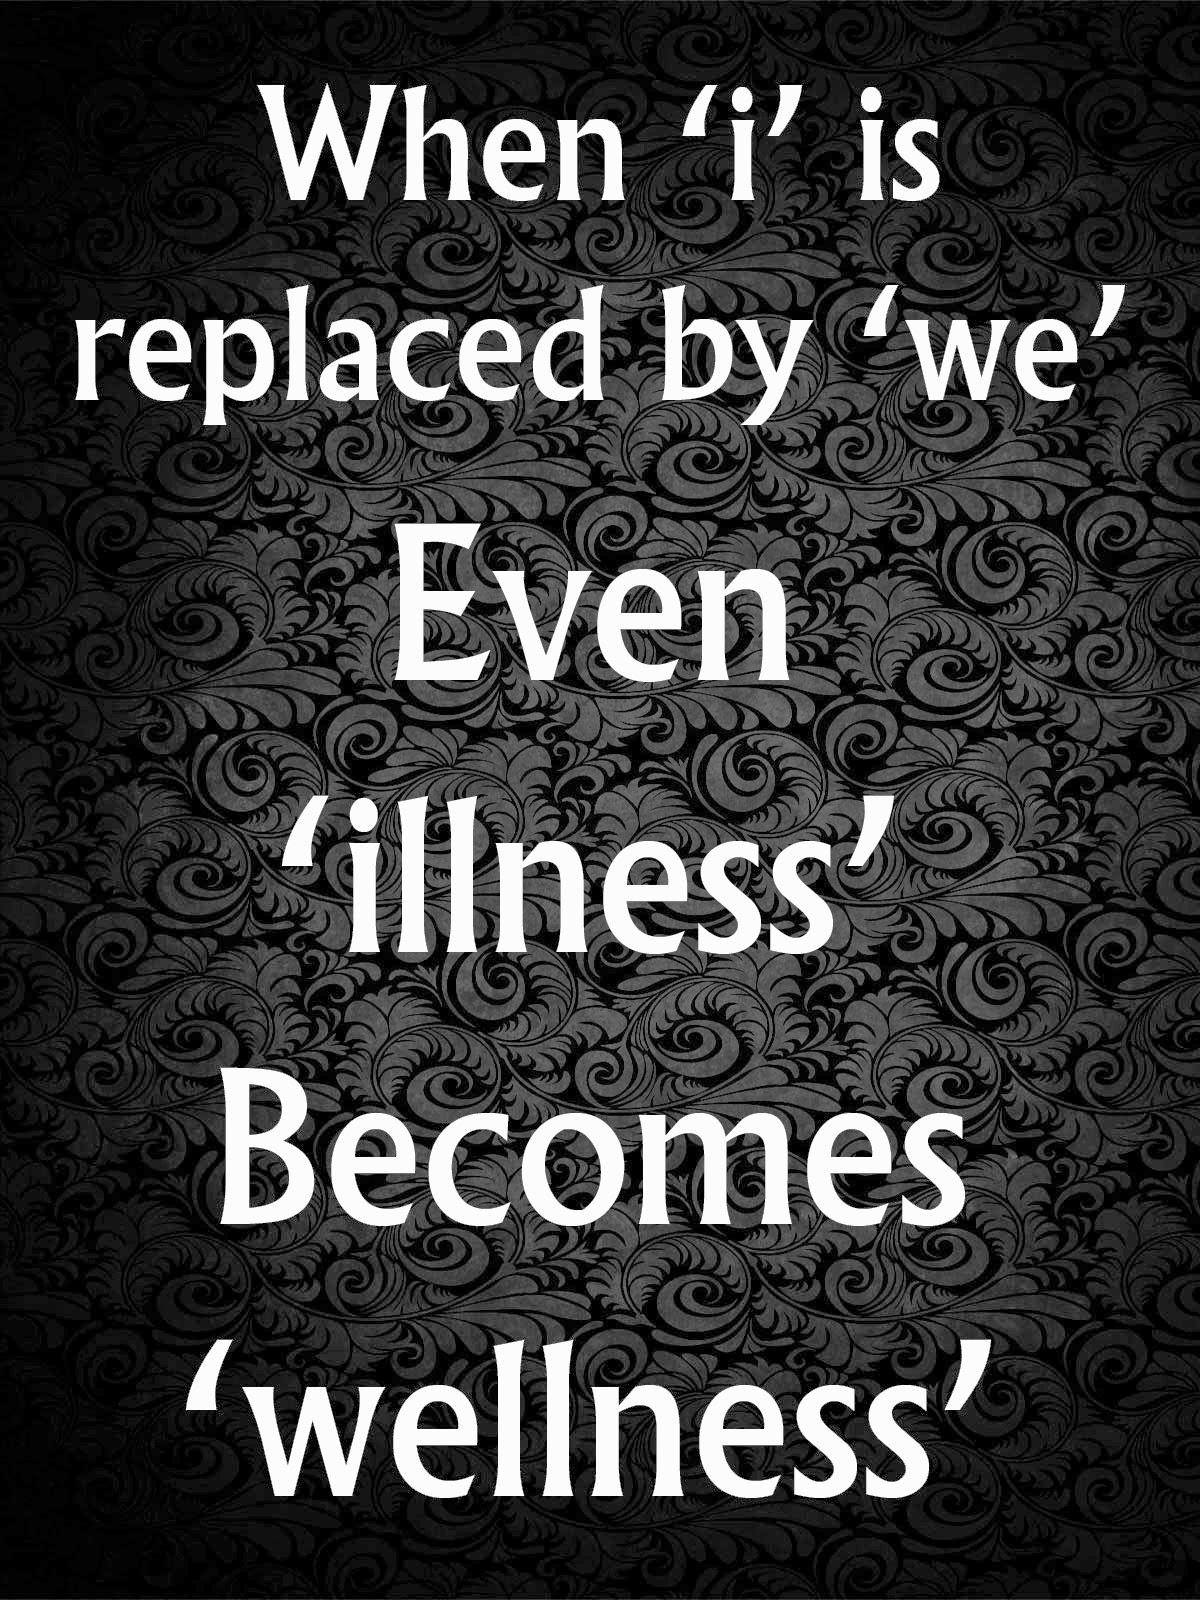 Decent Image Scraps: When i is replaced by we even illness becomes wellness1200 x 1600